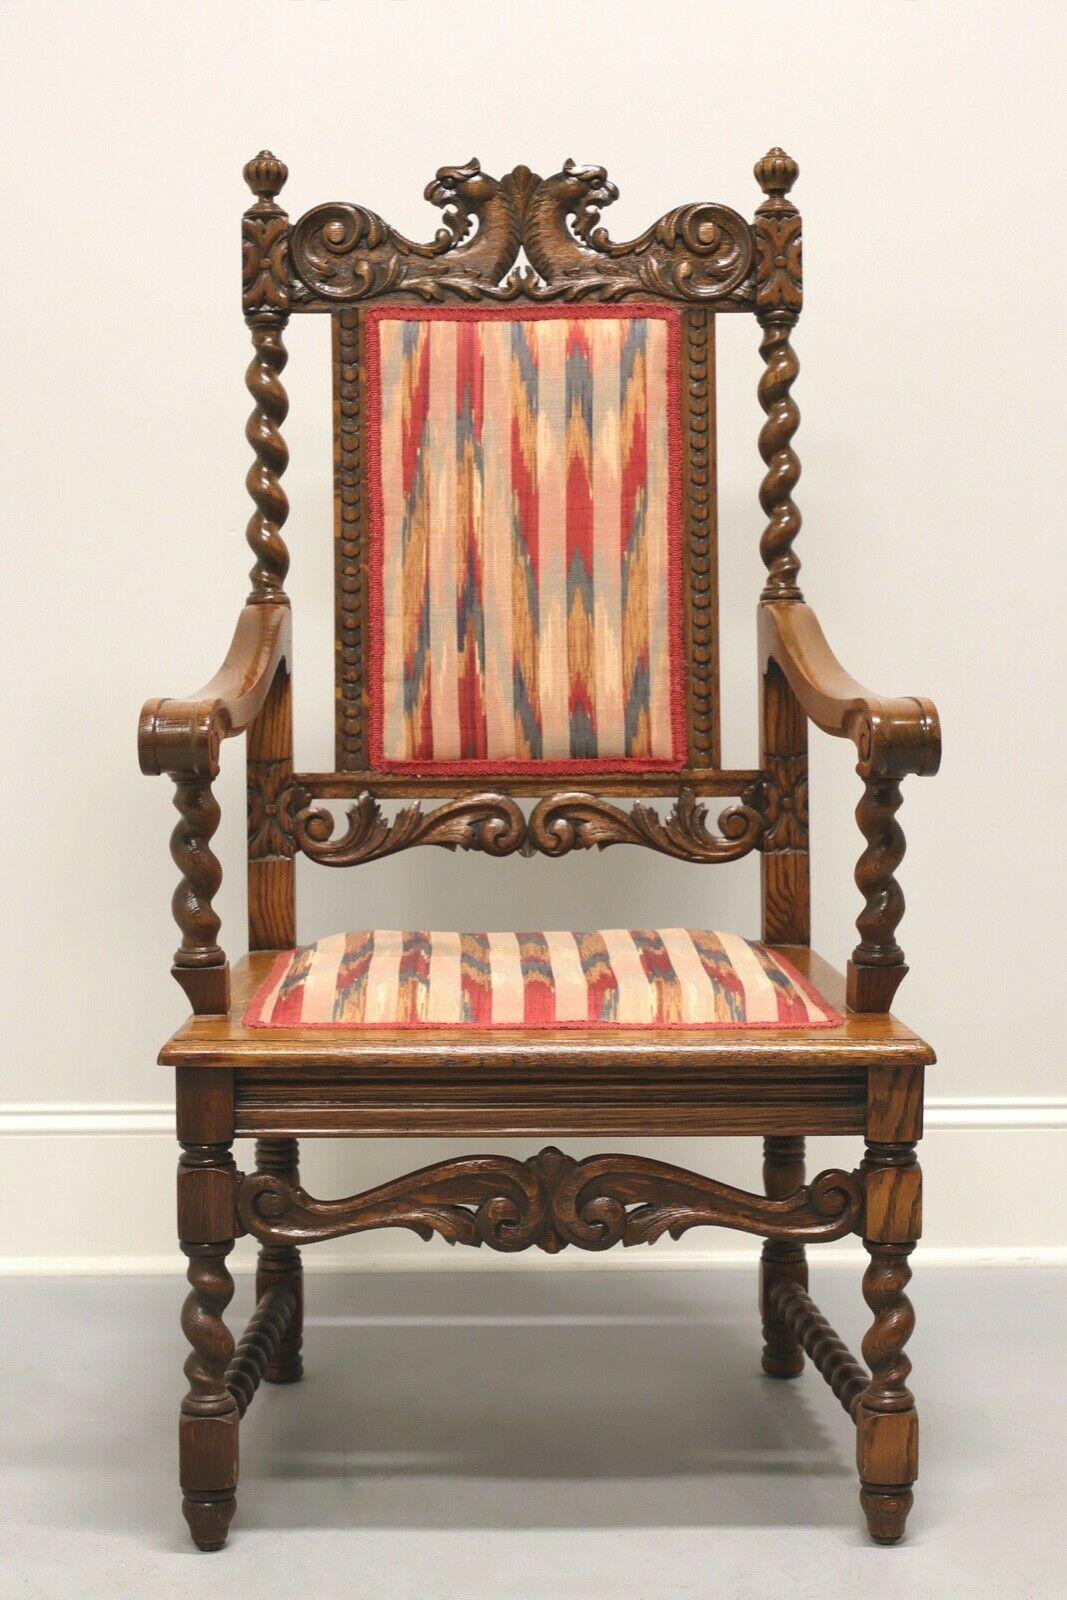 An antique Jacobean style open armchair, unbranded. Tiger oak with flame stripe fabric upholstered back and seat. Intricately carved details on back and apron with carved griffins at top. Barley twist on chair back, arm supports, stretchers and